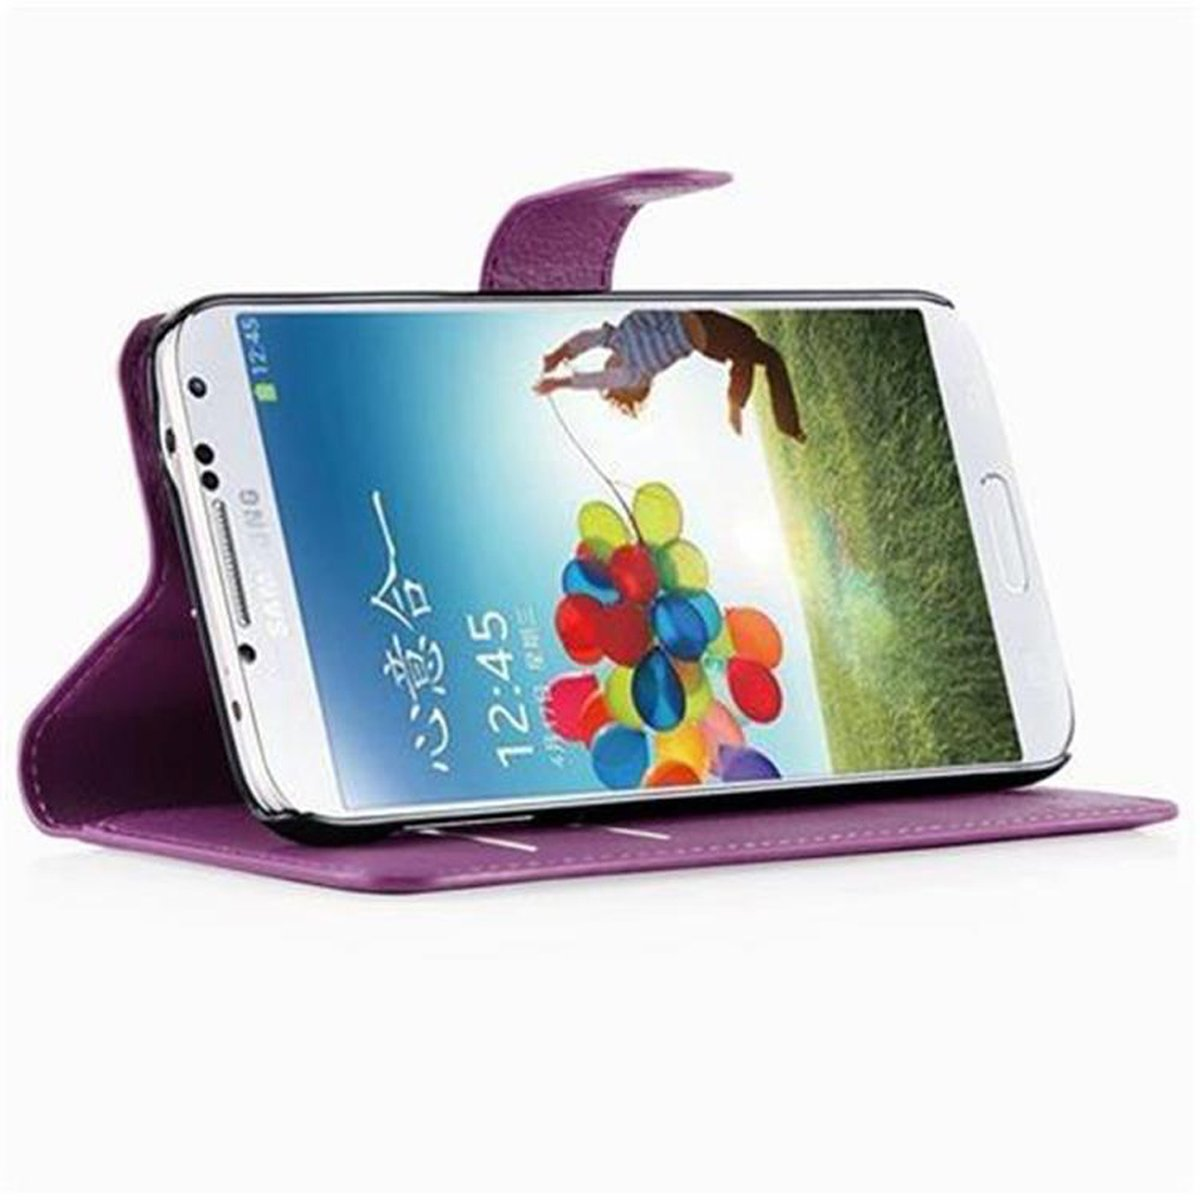 Hülle VIOLETT MANGAN NEO, Bookcover, CADORABO S5 Standfunktion, Book Samsung, / S5 Galaxy